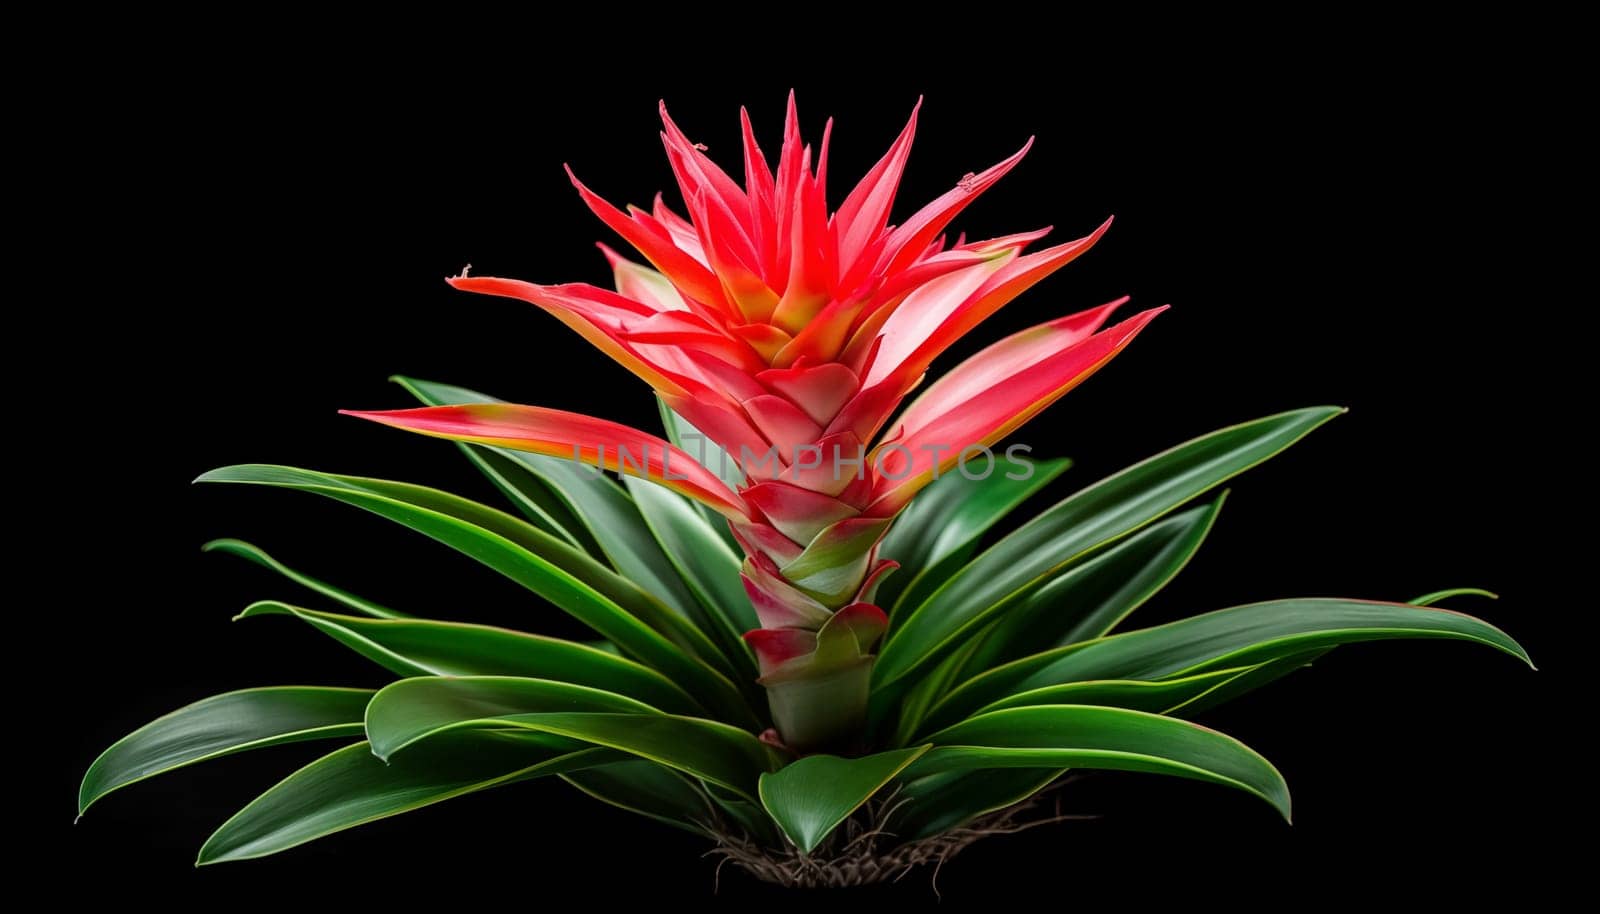 close-up of a Bromeliad plant showcasing by Nadtochiy